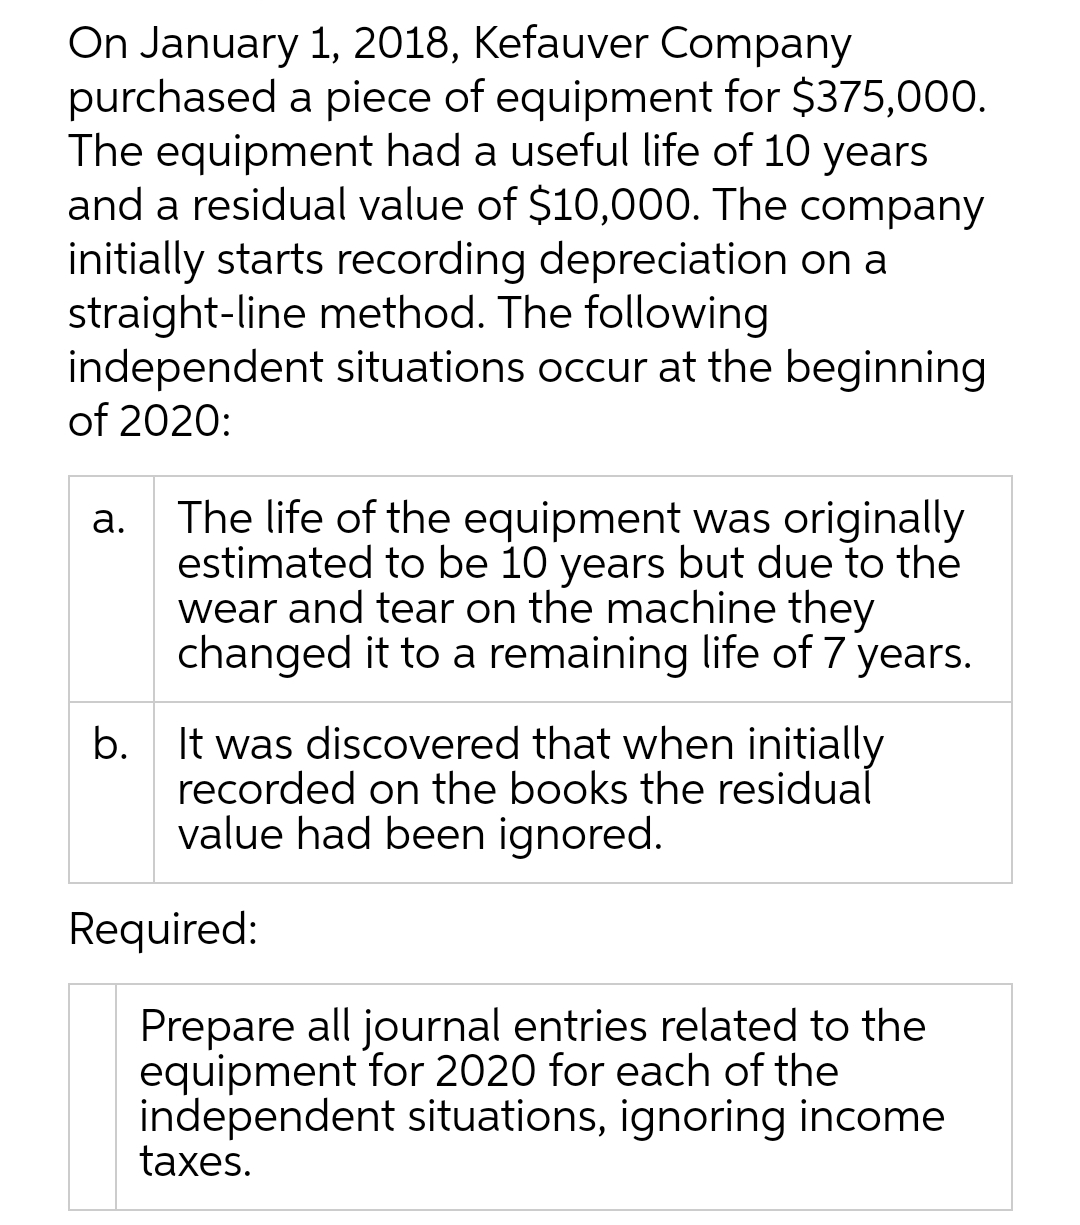 On January 1, 2018, Kefauver Company
purchased a piece of equipment for $375,000.
The equipment had a useful life of 10 years
and a residual value of $10,000. The company
initially starts recording depreciation on a
straight-line method. The following
independent situations occur at the beginning
of 2020:
The life of the equipment was originally
estimated to be 10 years but due to the
wear and tear on the machine they
changed it to a remaining life of 7 years.
а.
b.
It was discovered that when initially
recorded on the books the residual
value had been ignored.
Required:
Prepare all journal entries related to the
equipment for 2020 for each of the
independent situations, ignoring income
taxes.
